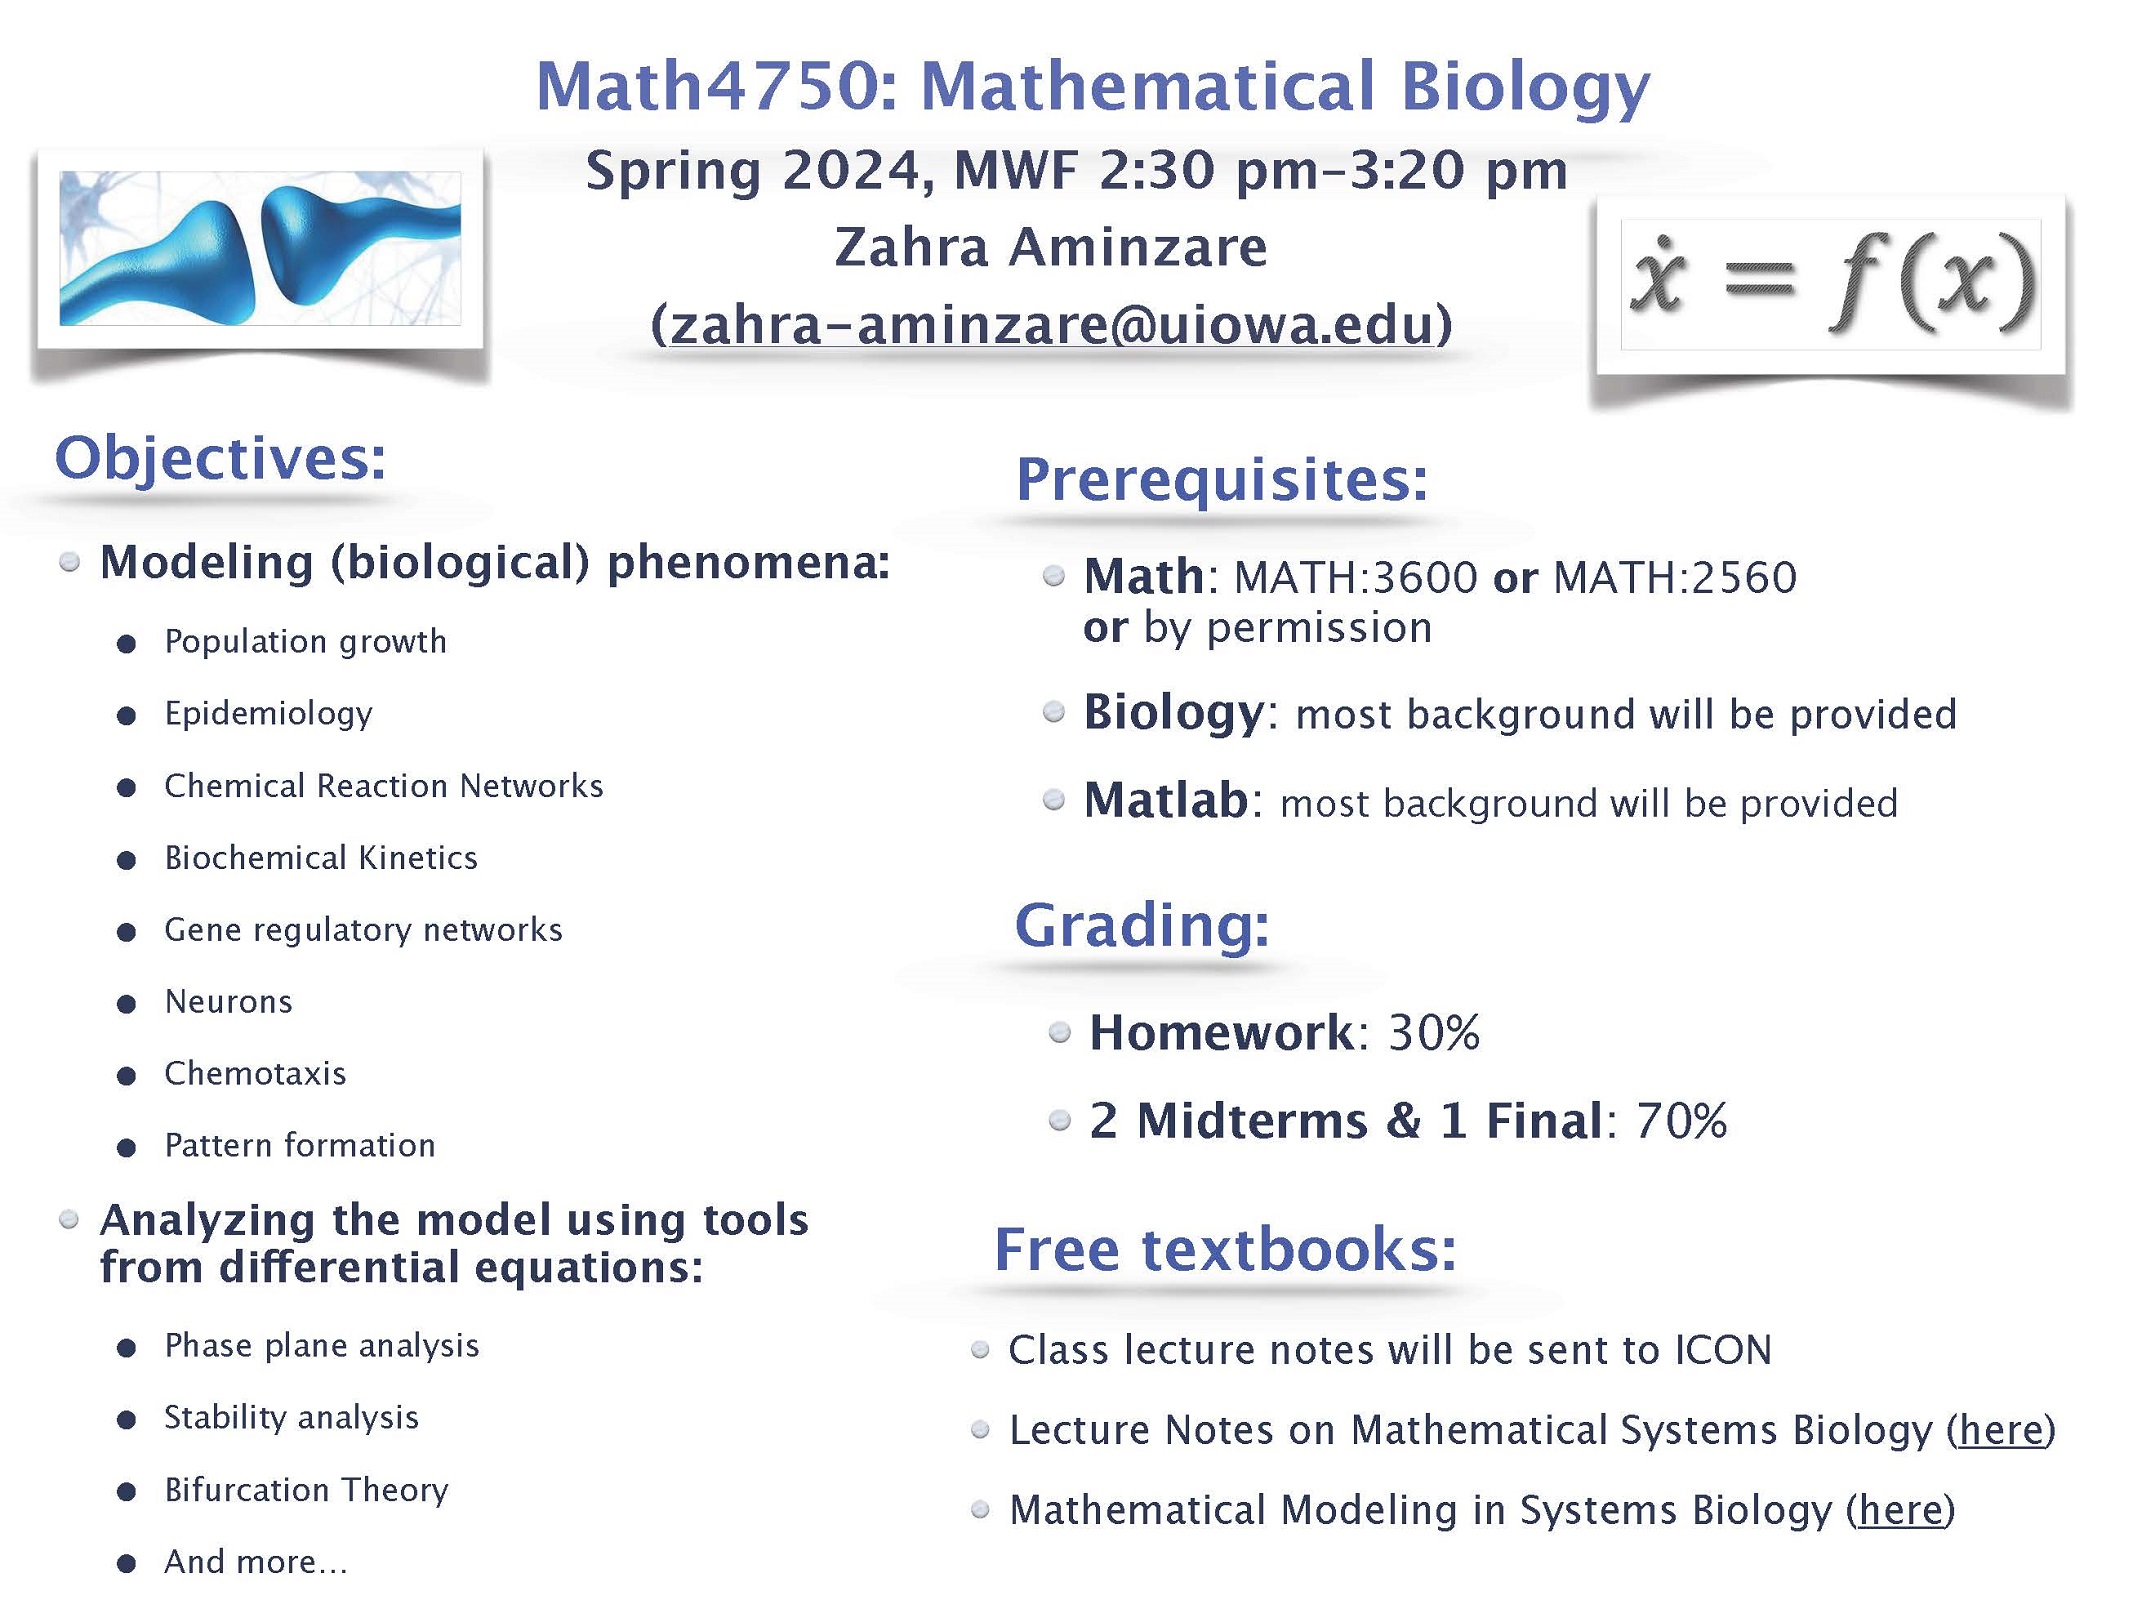 Objectives: Math: MATH:3600 or MATH:2560 or by permission Biology: most background will be provided Matlab: most background will be provided Homework: 30% 2 Midterms & 1 Final: 70% Class lecture notes will be sent to ICON Lecture Notes on Mathematical Systems Biology (here) Mathematical Modeling in Systems Biology (here) Prerequisites: Grading: Free textbooks: Math4750: Mathematical Biology Spring 2024, MWF 2:30 pm–3:20 pm Zahra Aminzare (zahra-aminzare@uiowa.edu) Modeling (biological) phenomena: • Population growth • Epidemiology • Chemical Reaction Networks • Biochemical Kinetics • Gene regulatory networks • Neurons • Chemotaxis • Pattern formation Analyzing the model using tools from differential equations: • Phase plane analysis • Stability analysis • Bifurcation Theory • And more…